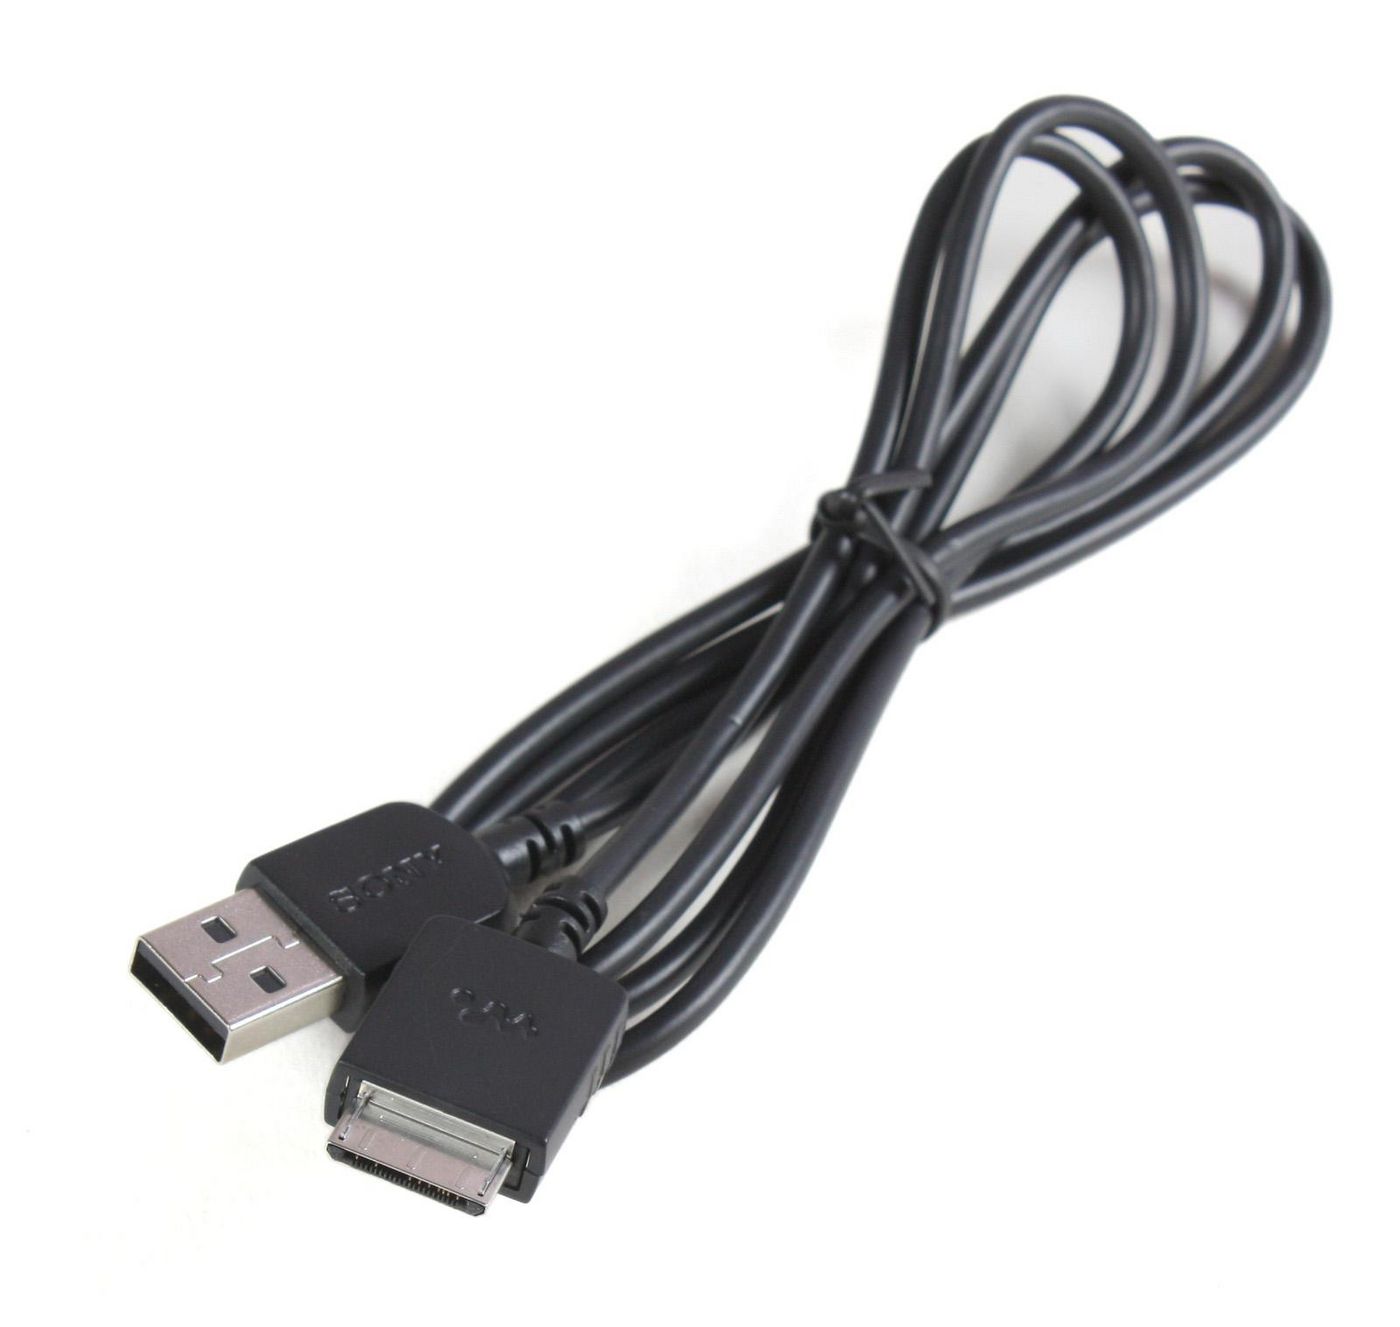 Sony 183594062 PC Connection Cord 